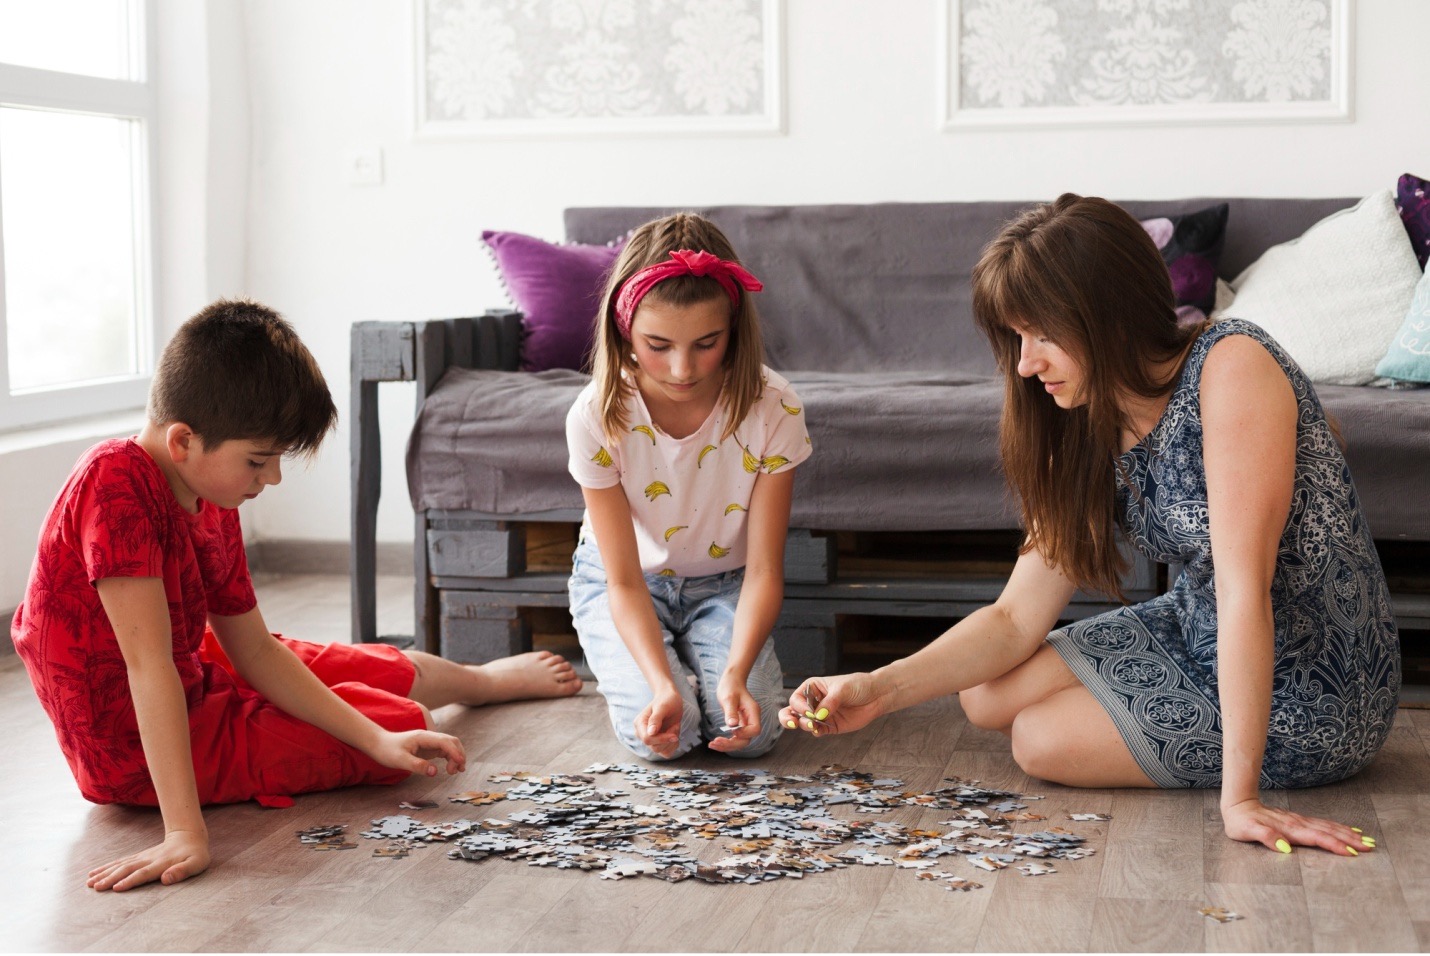 Two kids and a woman sitting on the floor in front of a couch with puzzle pieces spilled out in front of them.